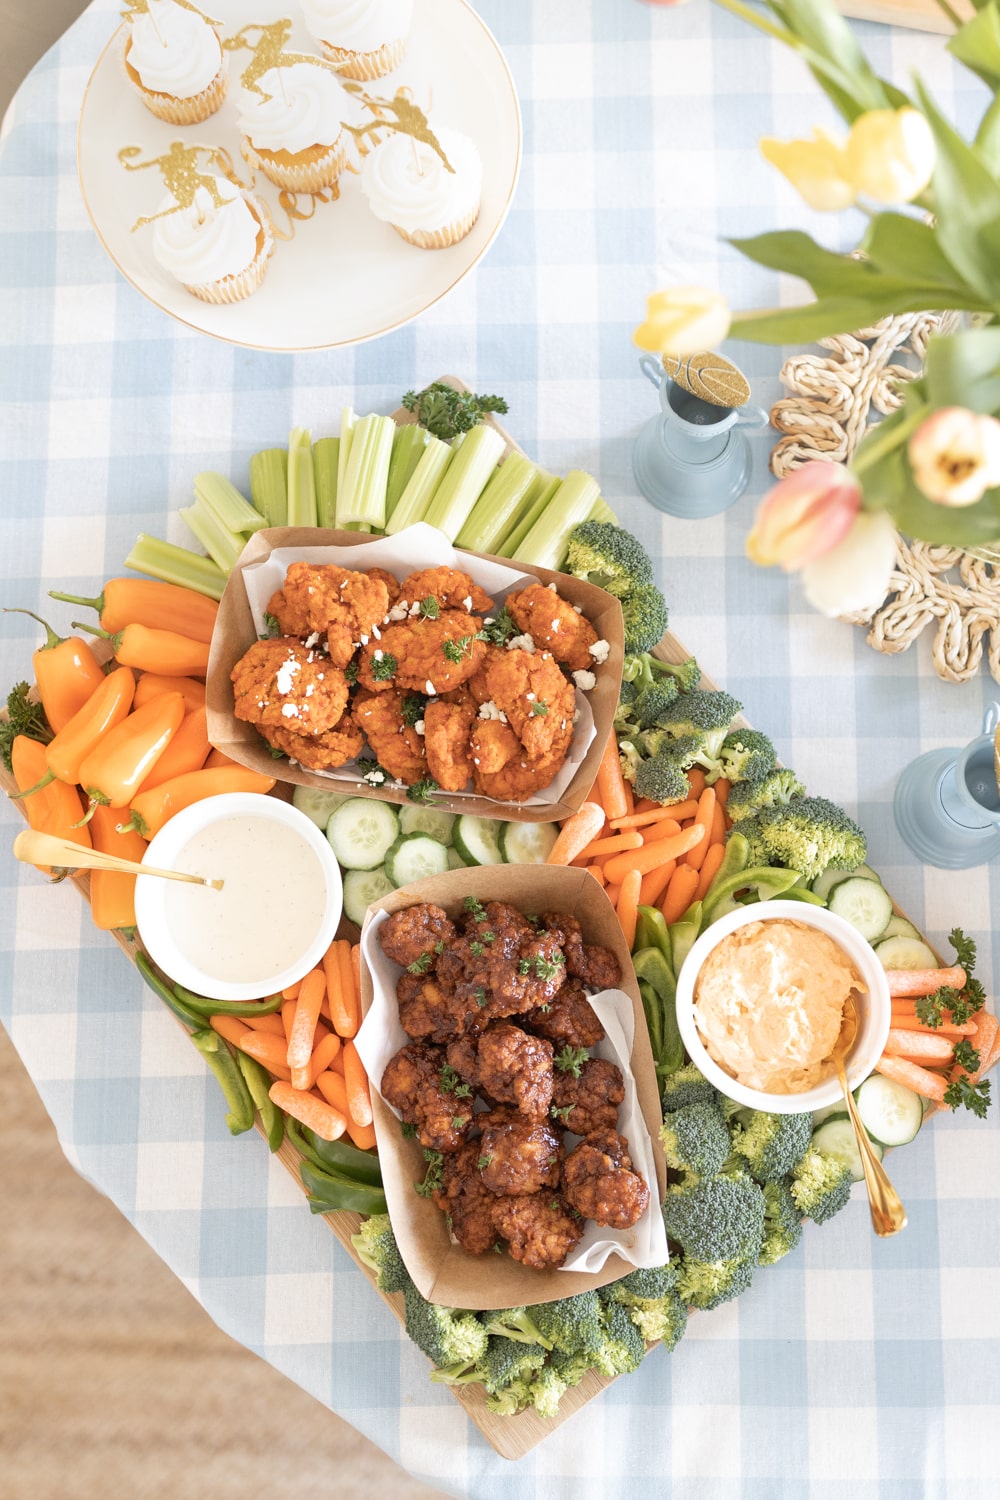 Wing charcuterie board created by blogger Stephanie Ziajka on Diary of a Debutante